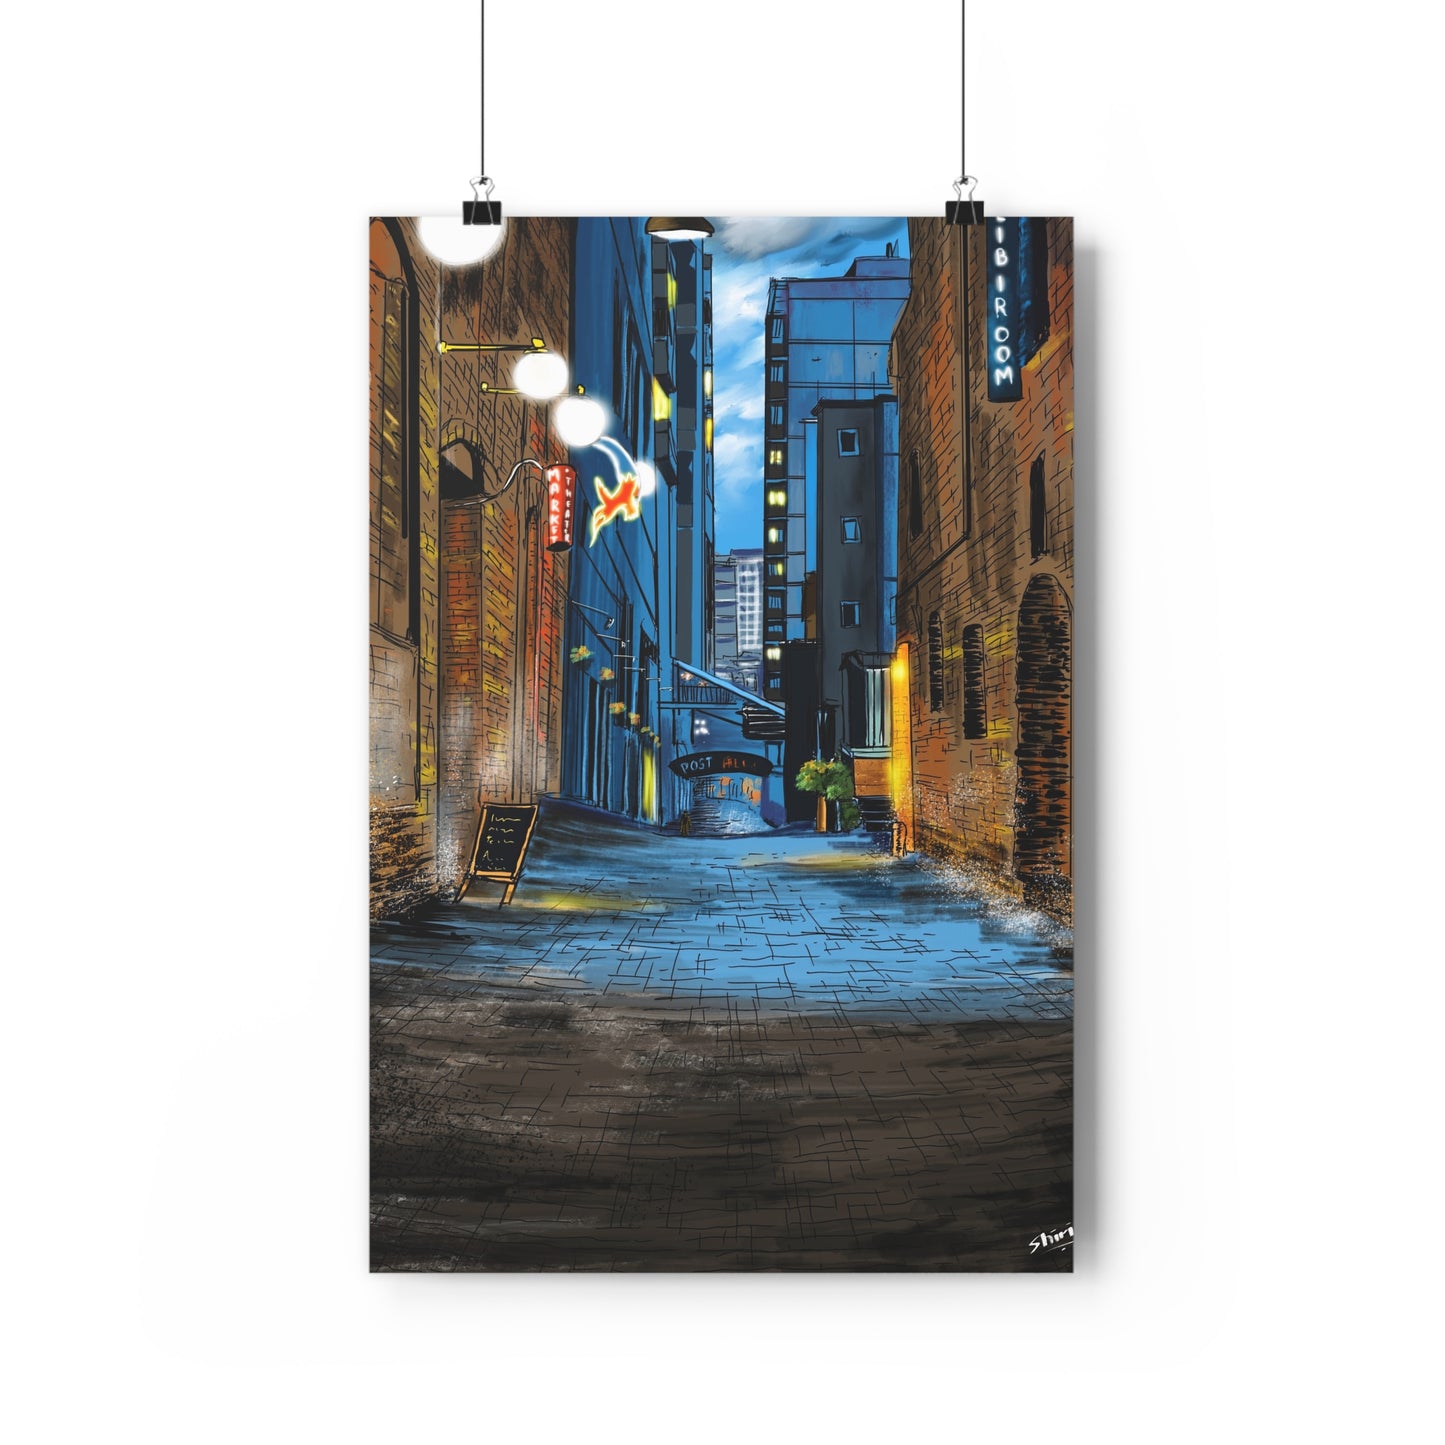 A Quiet Lane in a Busy City - Premium Poster